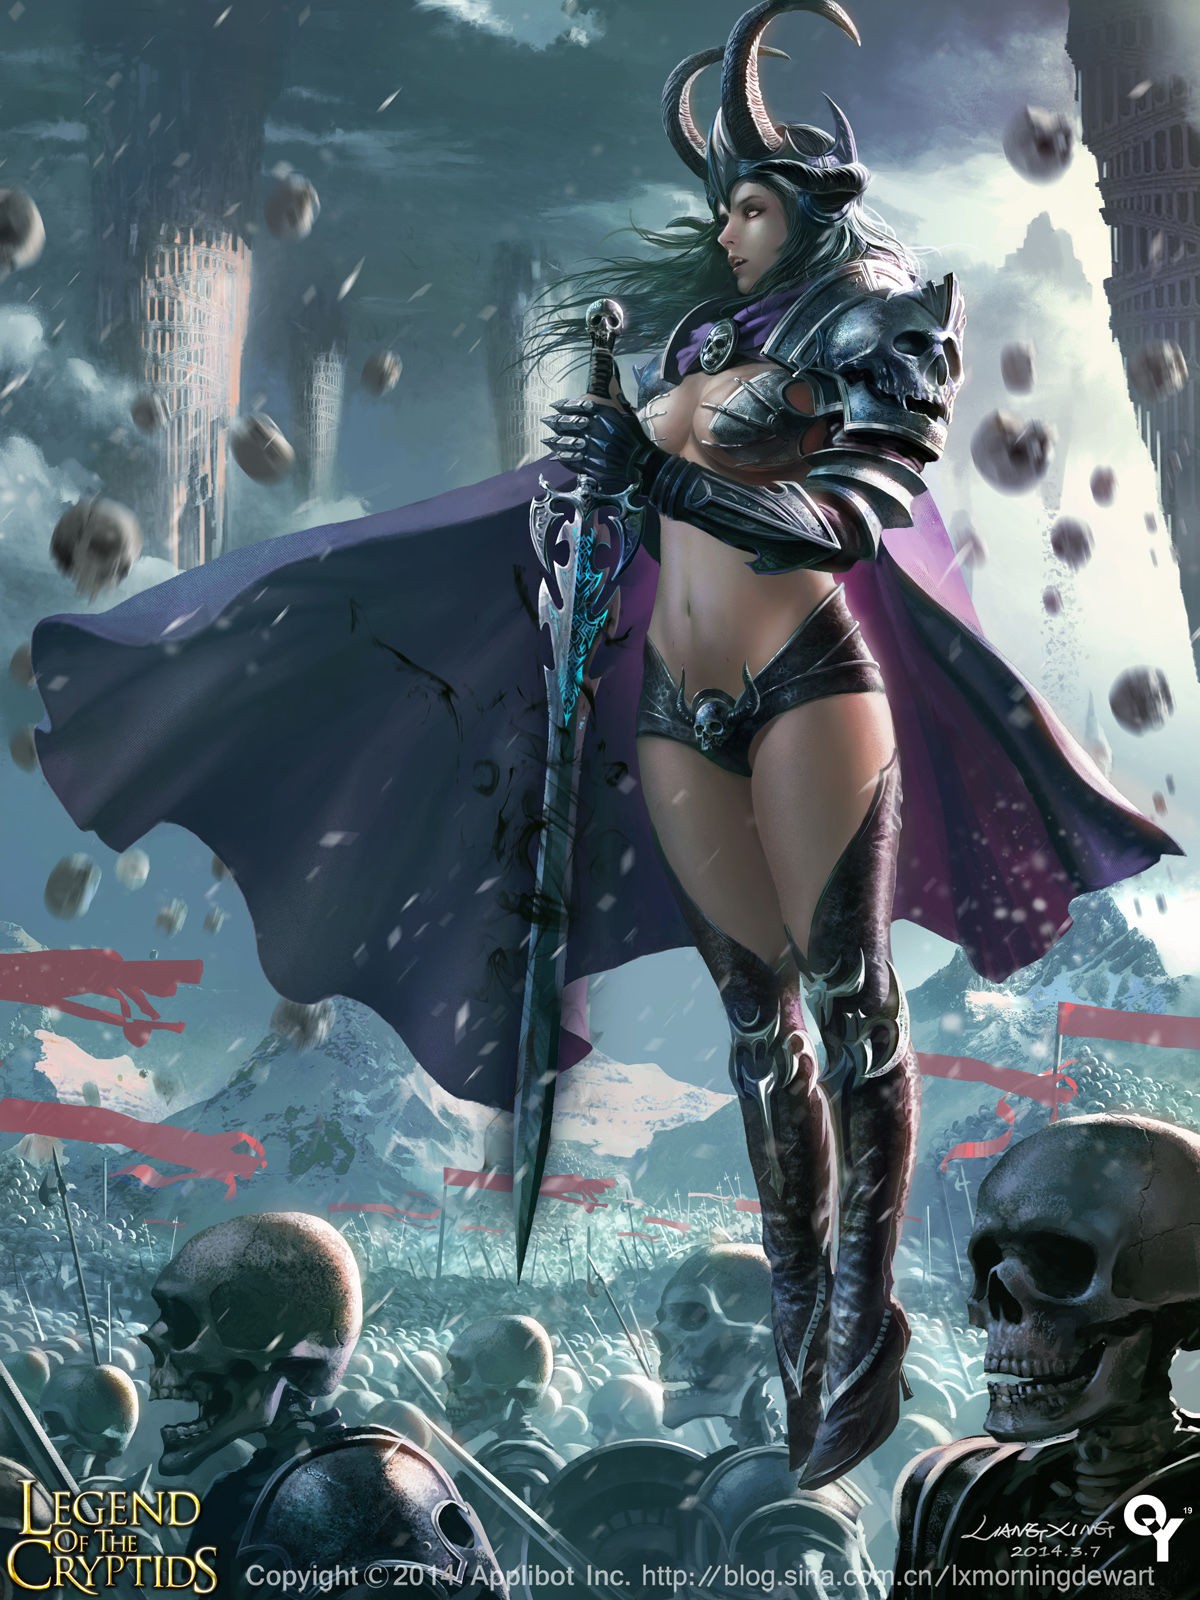 General 1200x1600 Legend of the Cryptids video games horns sword fantasy girl fantasy art women with swords weapon cape skull skeleton boobs belly bra panties boots